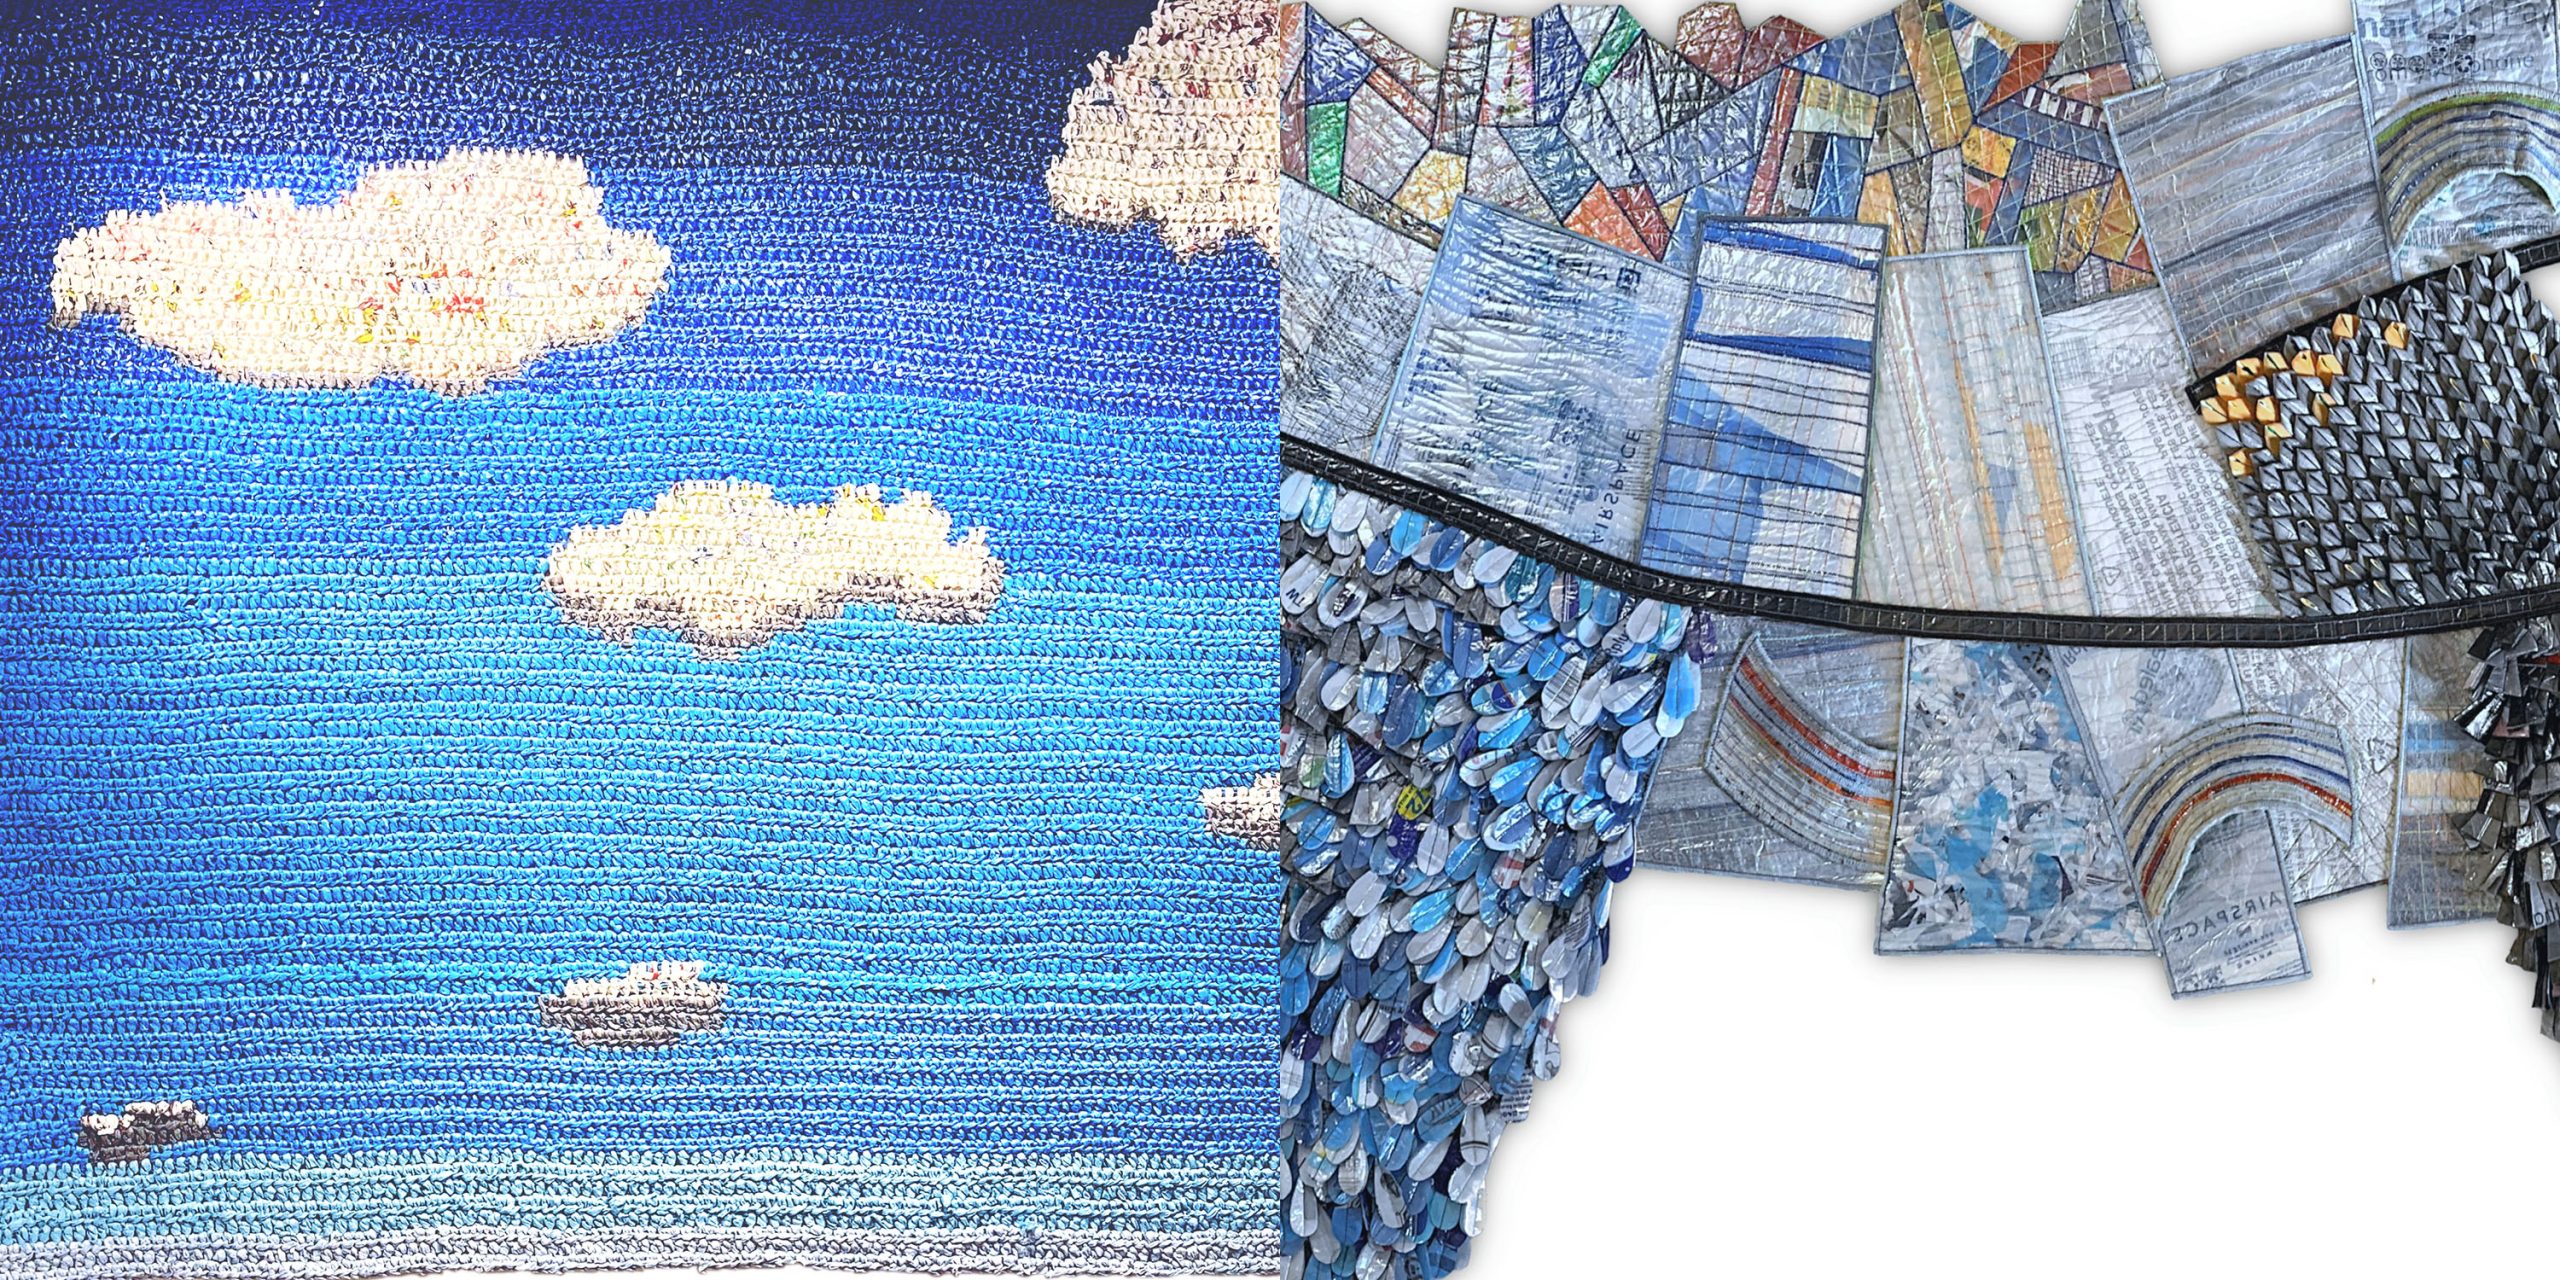 Detail images of two artworks in blue tones made of plastic. The work on the left is crocheted and shows white, puffy clouds against a bright blue sky. On the right, small pieces of plastic form textures and overlapping shapes. In places it looks like rain drops.